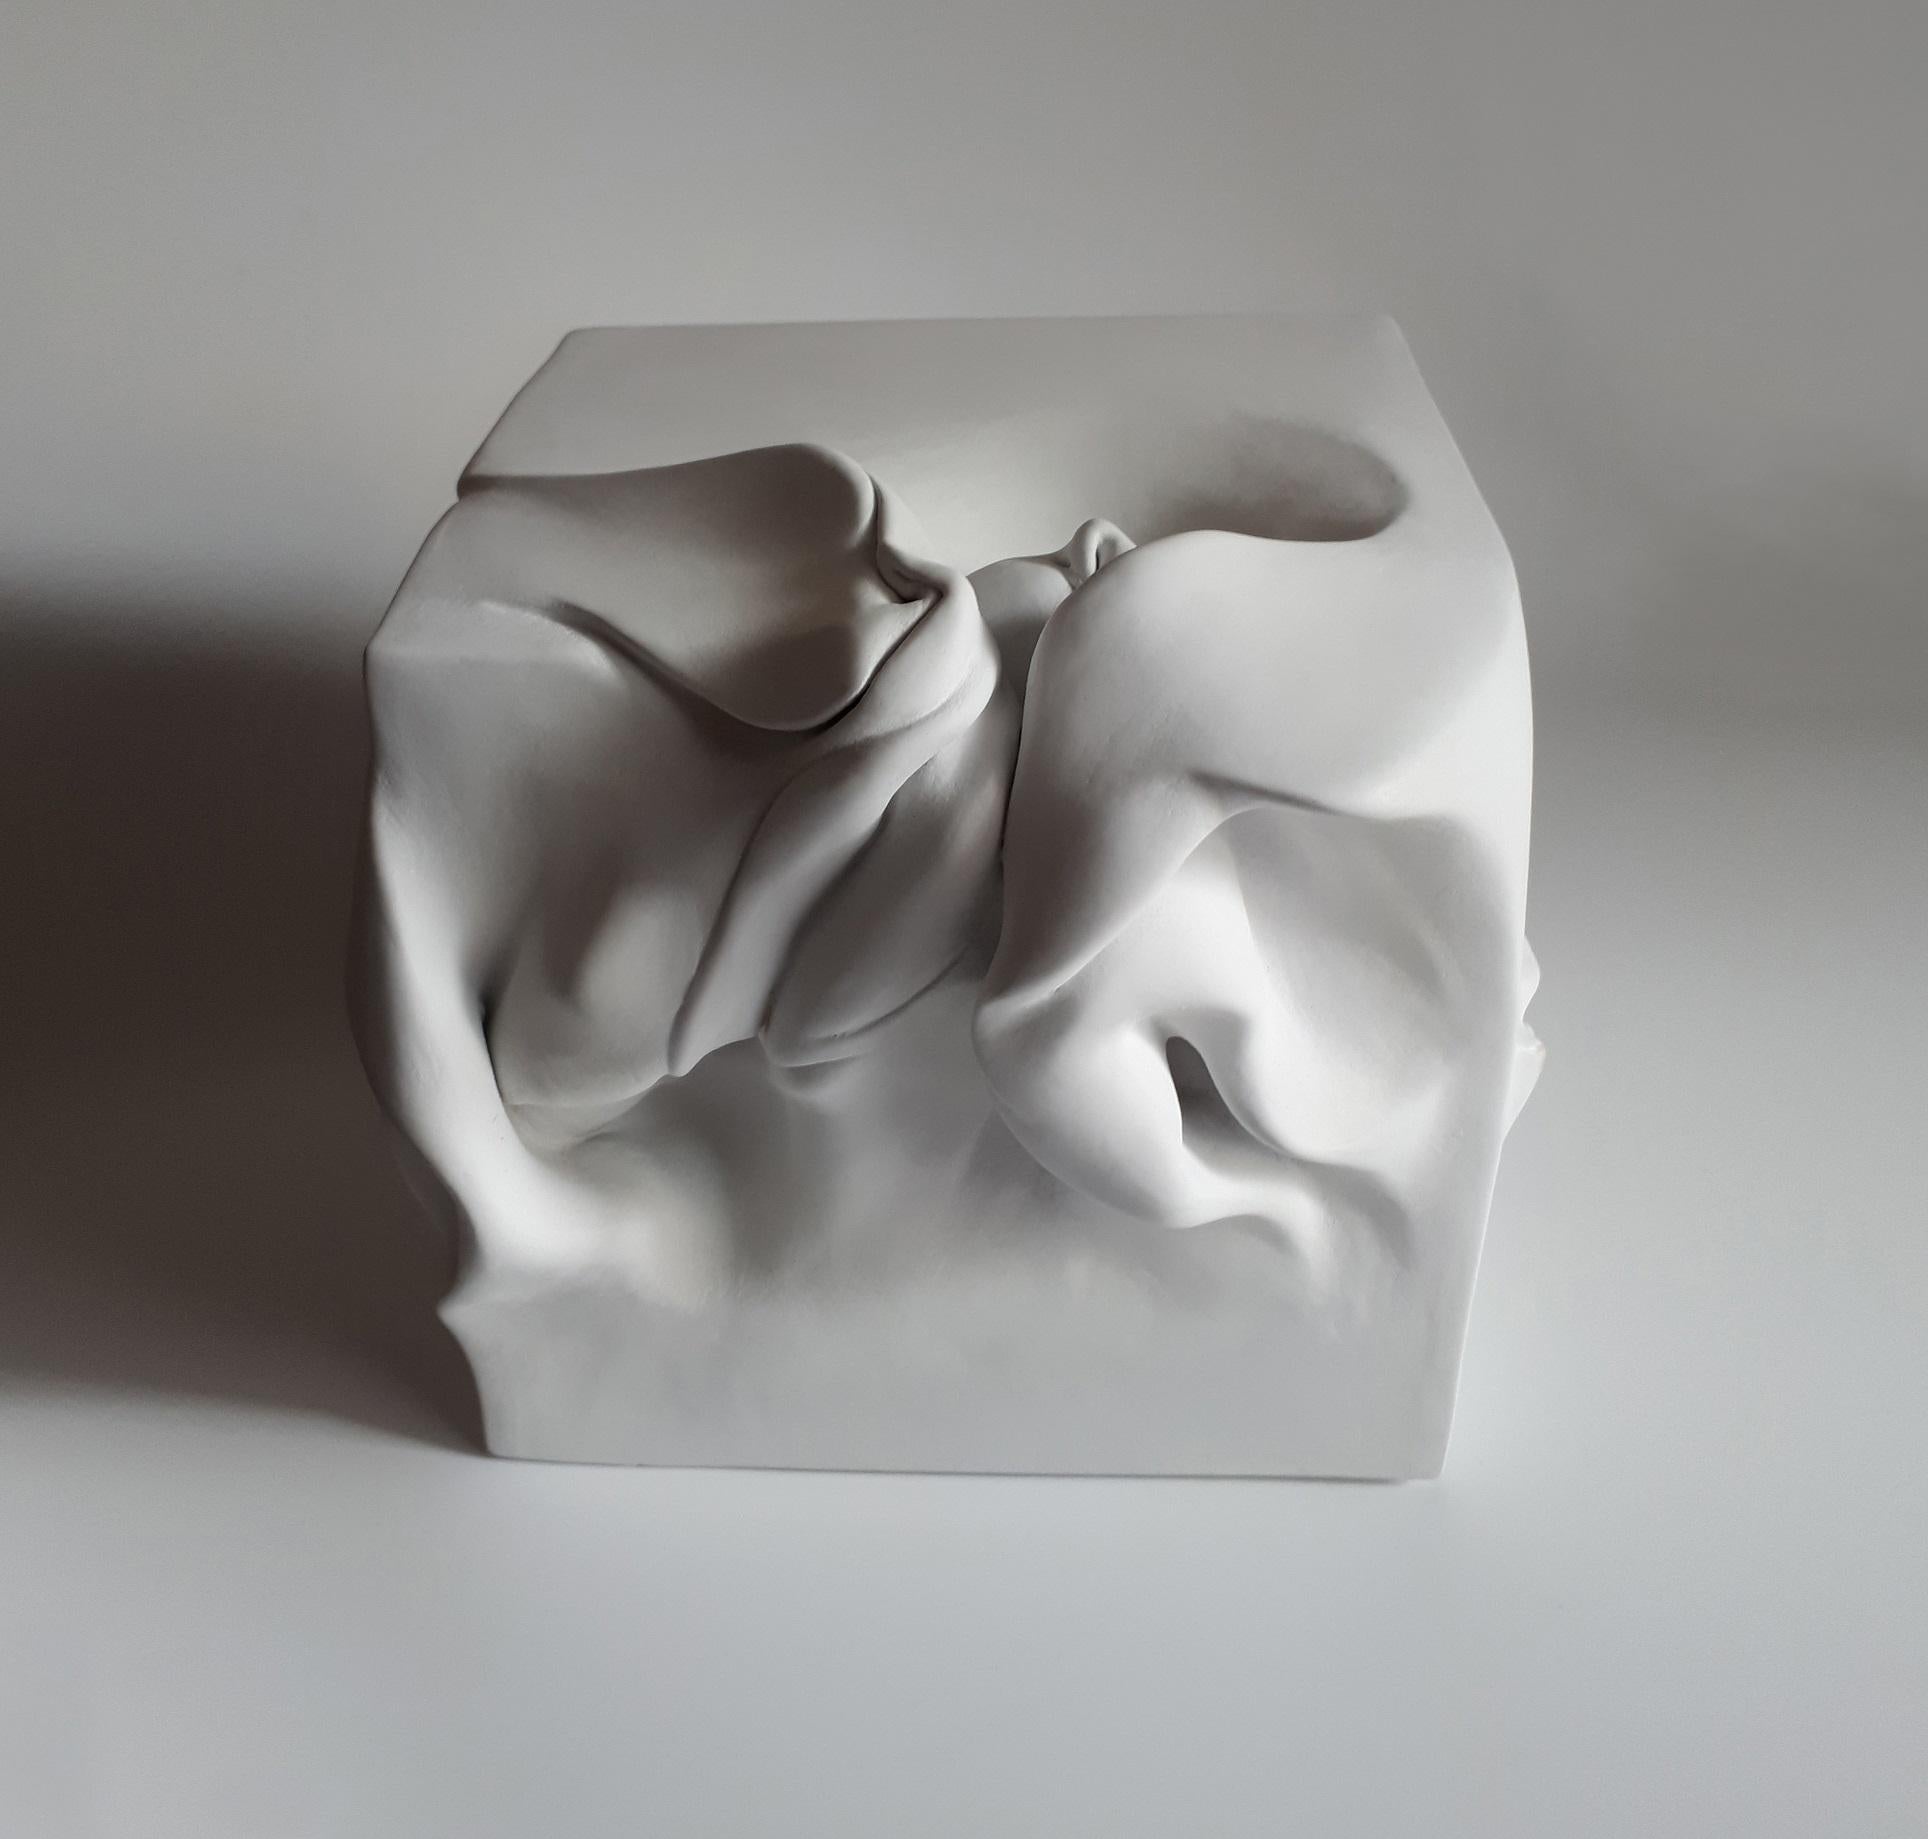 Cube 1 is a unique sculpture by contemporary artist Sharon Brill. This sculpture is made of painted fired clay, dimensions are 19 × 20 × 21 cm
(7.5 × 7.9 × 8.3 in).

Sharon Brill’s production is made of pieces whose aesthetics is marked and